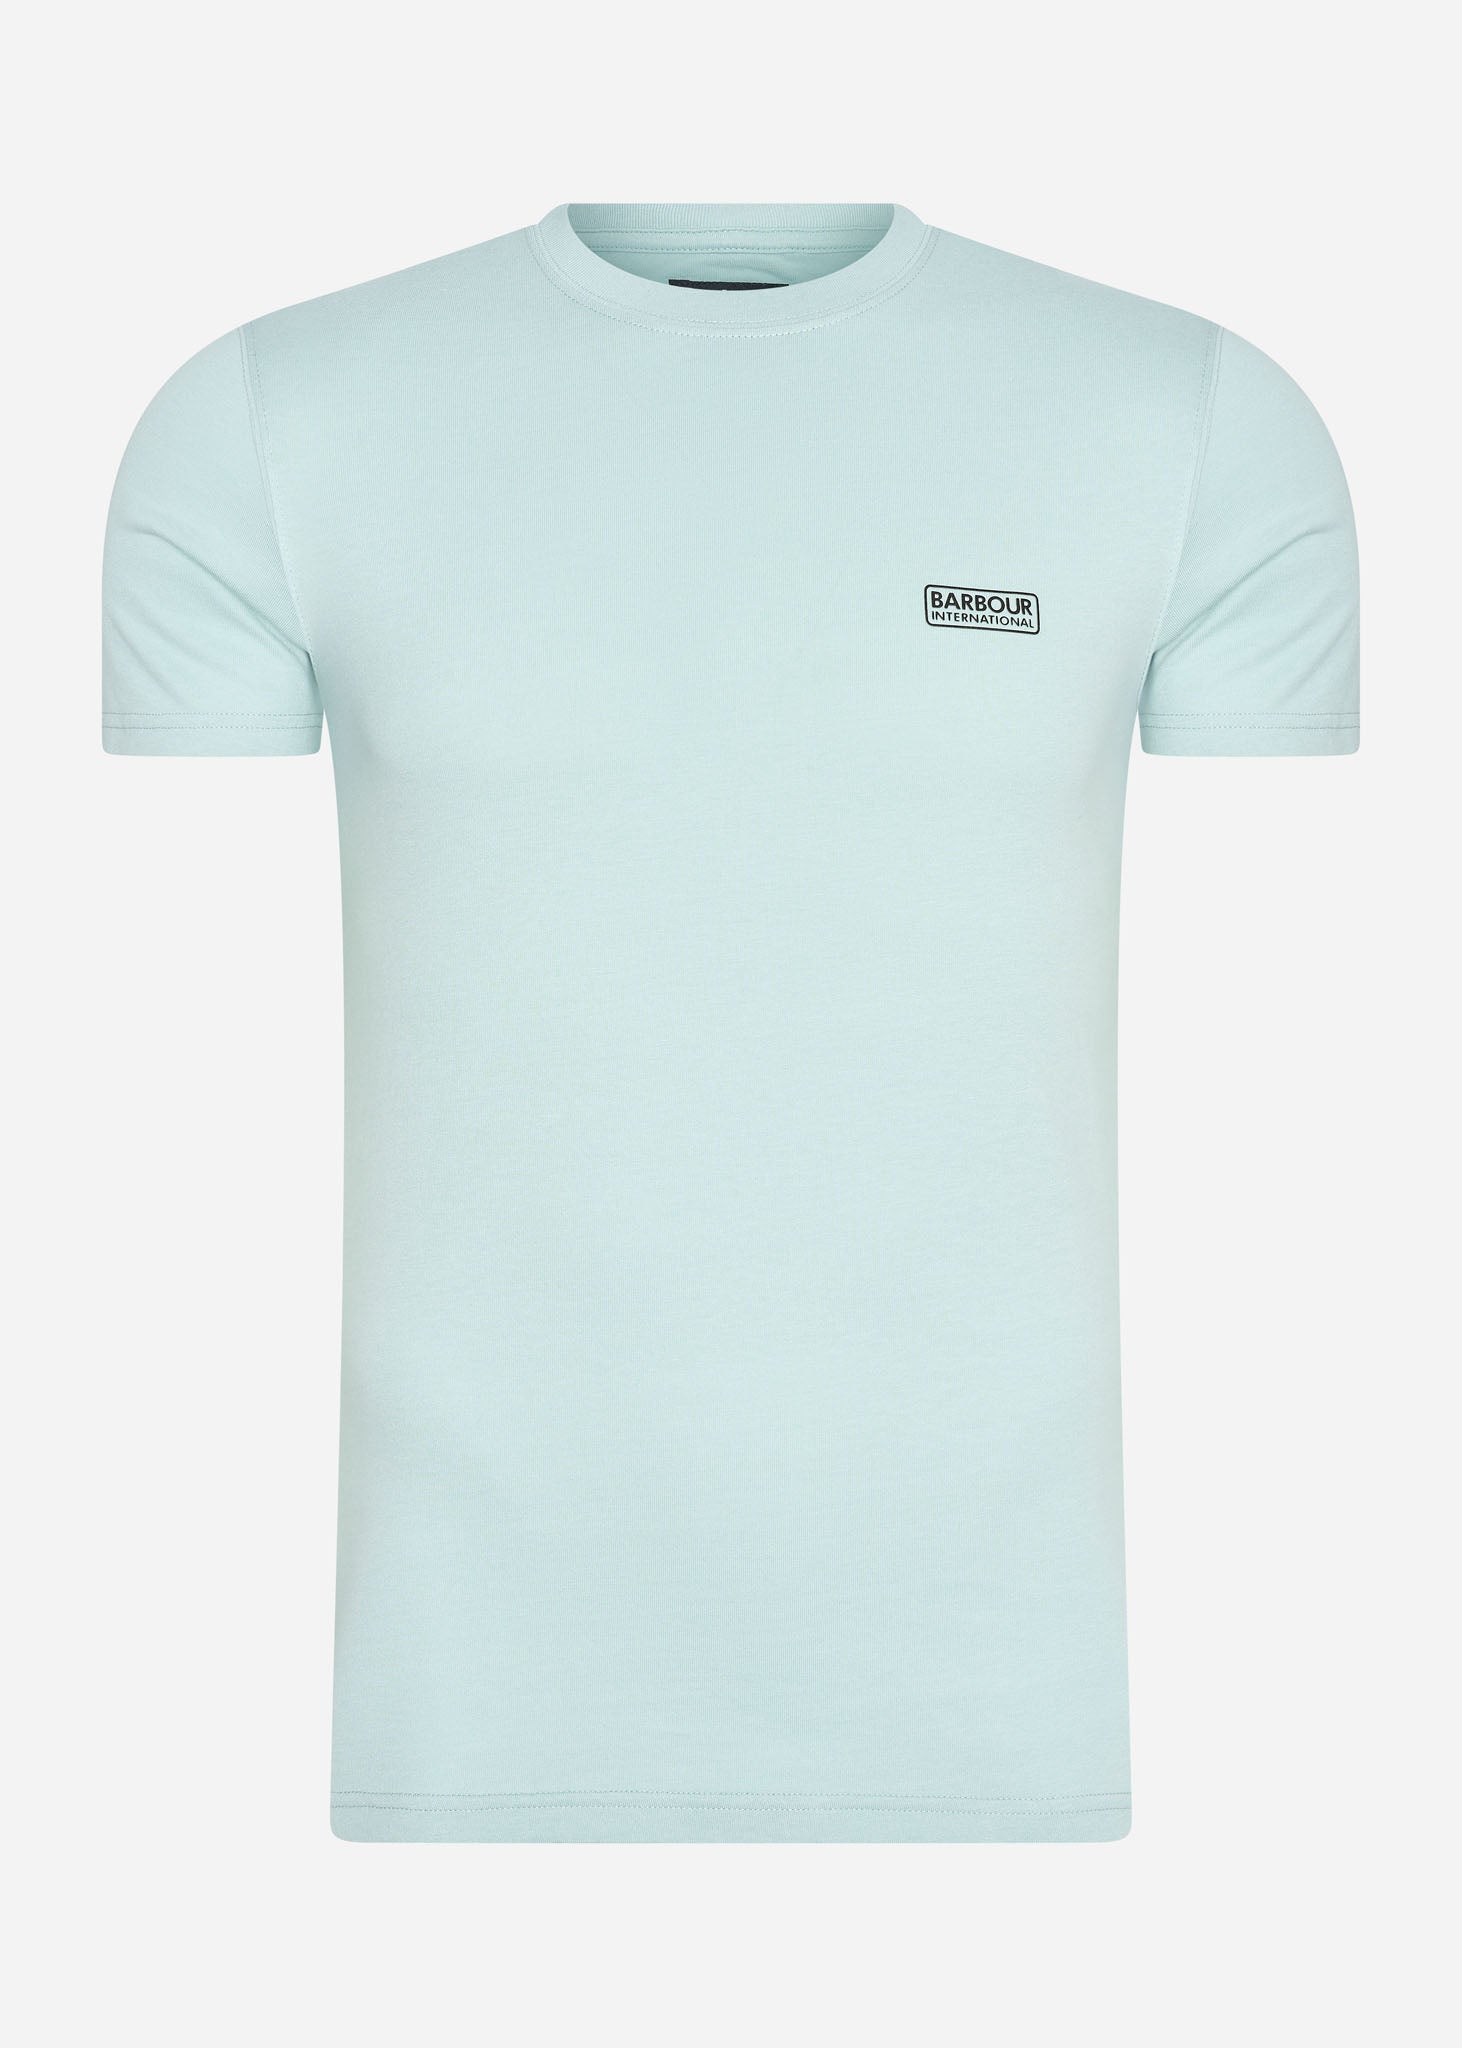 Barbour International T-shirts  Small logo tee - pastel spruce 